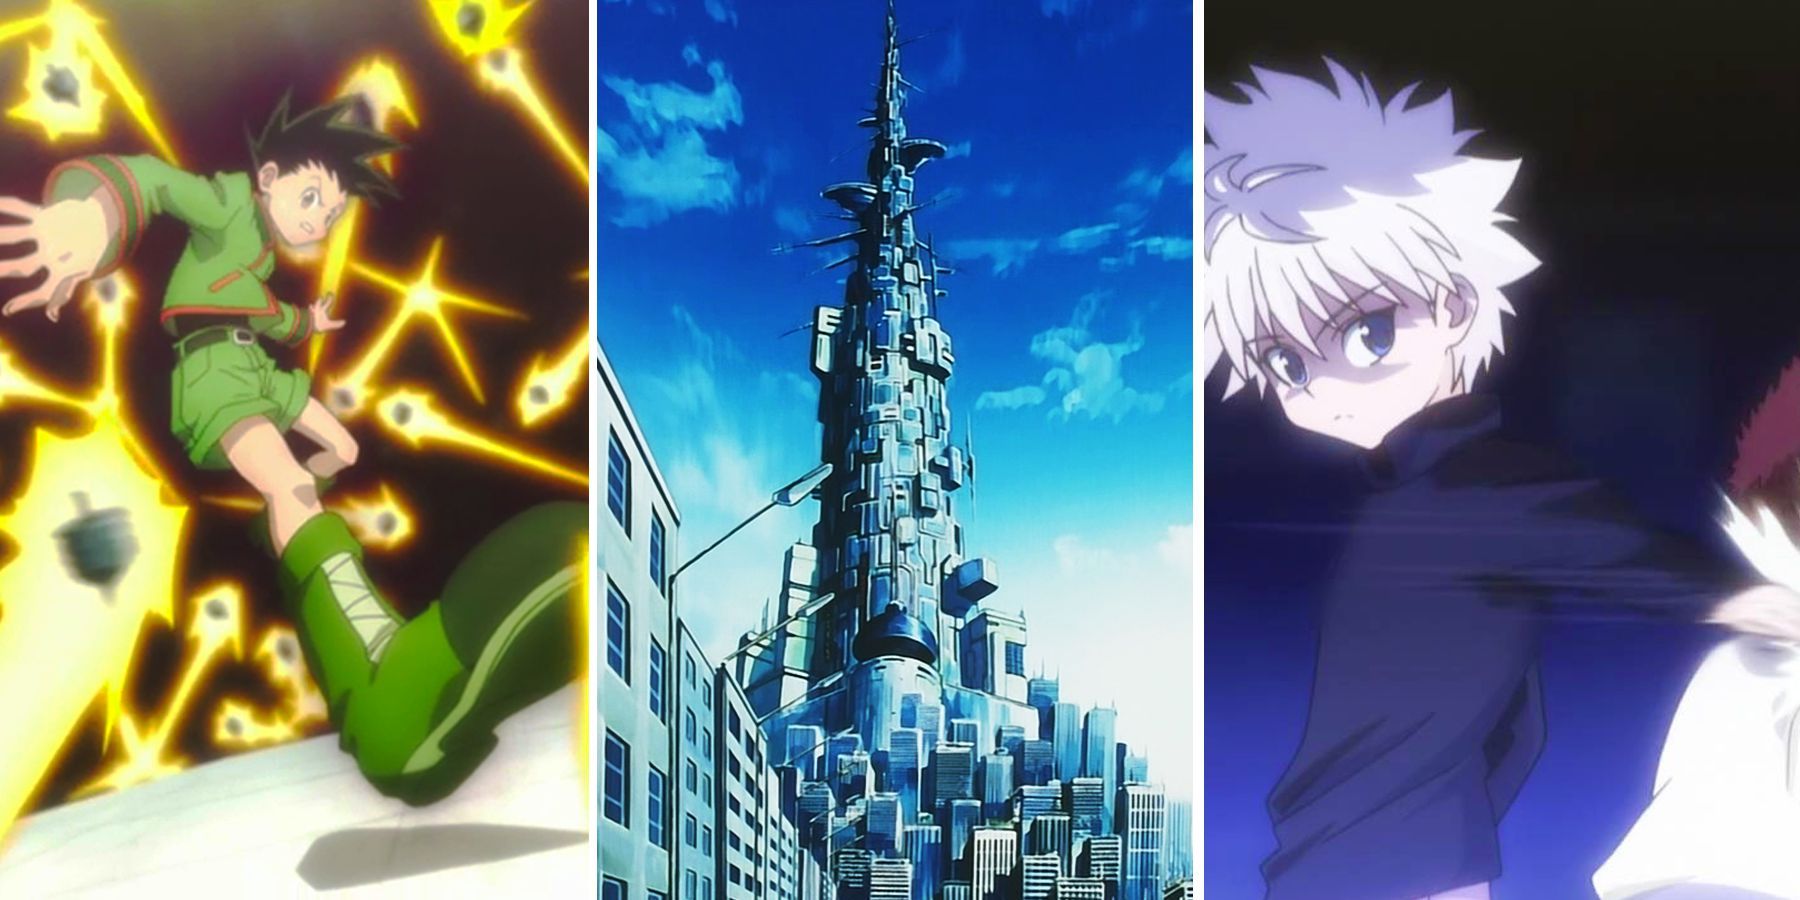 What Ruleset would you use to do Hunter X Hunter Anime?